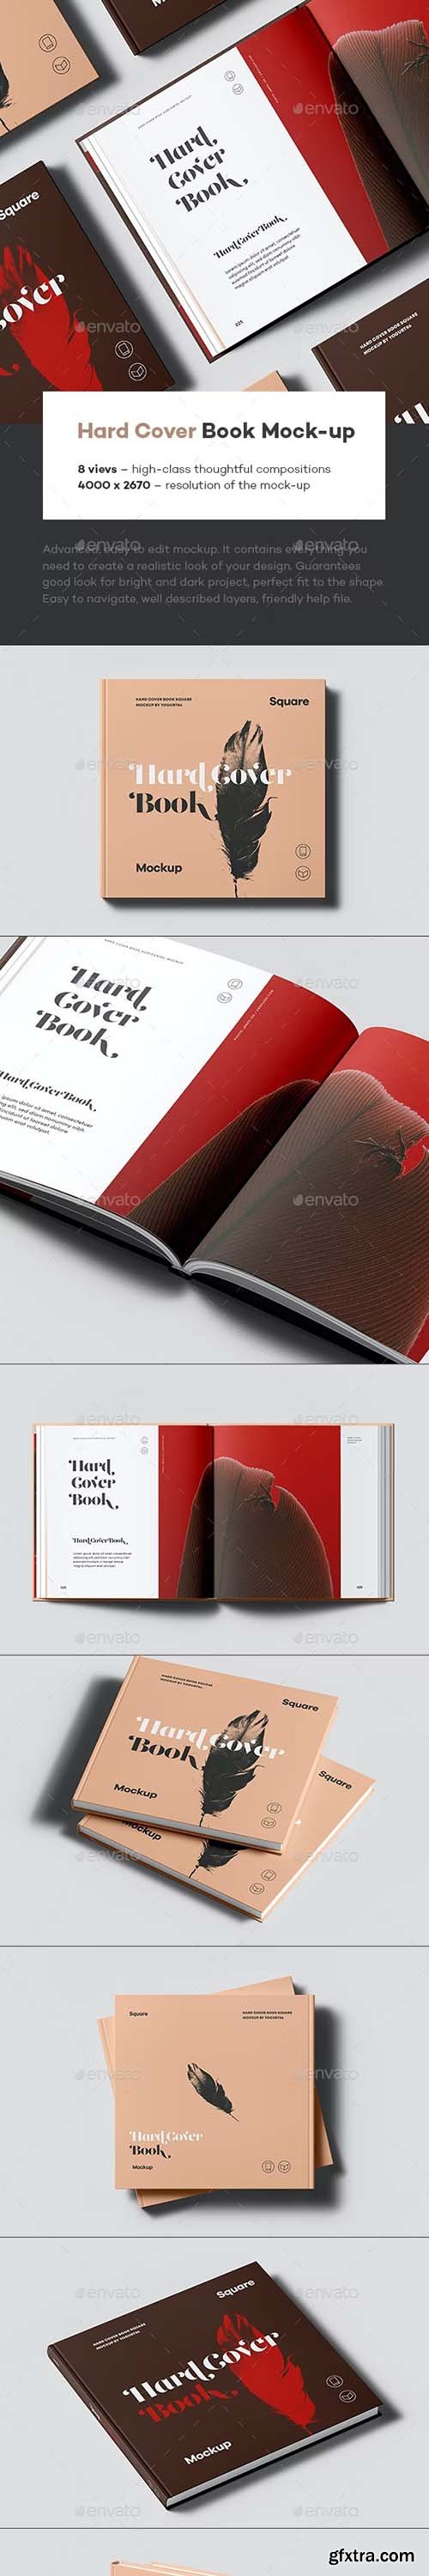 Graphicriver - Hard Cover Square Book Mock-up 41694675